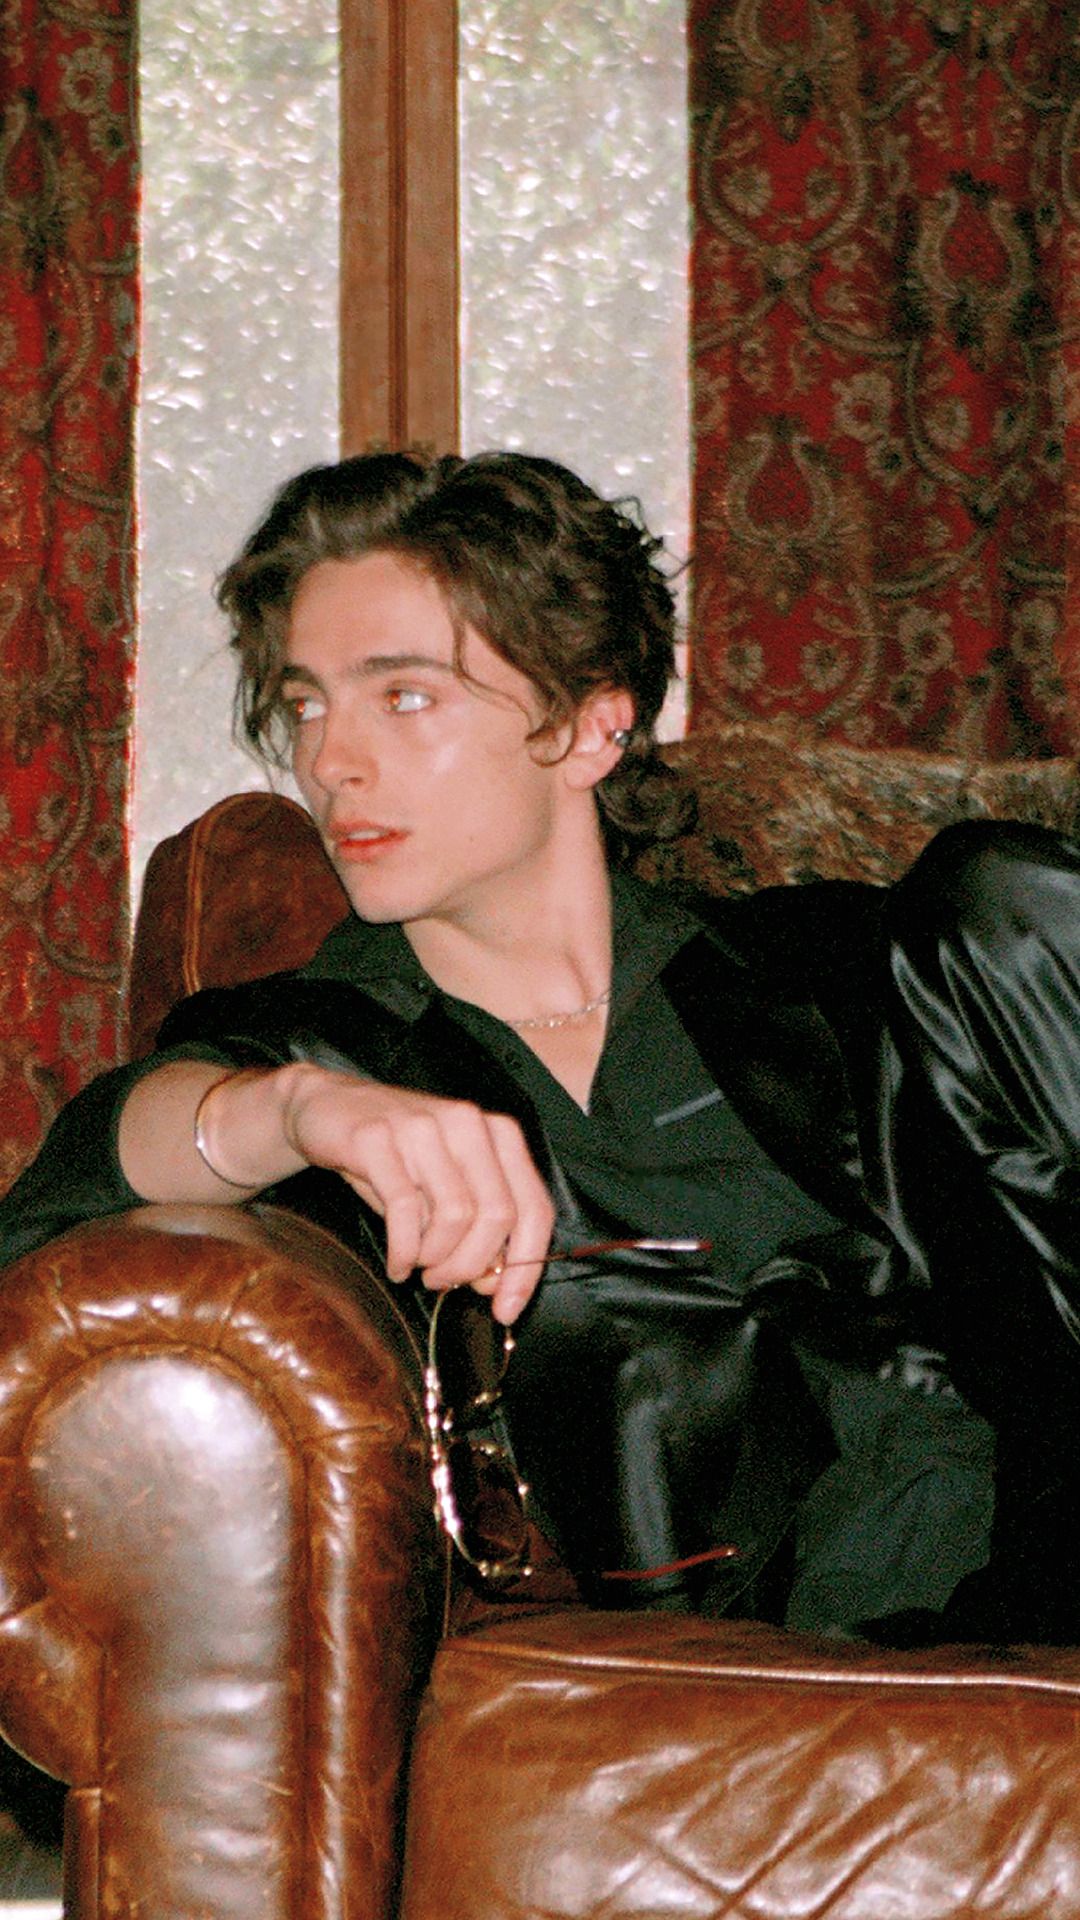 Timothee Chalamet in a black suit sitting on a brown couch - Timothee Chalamet